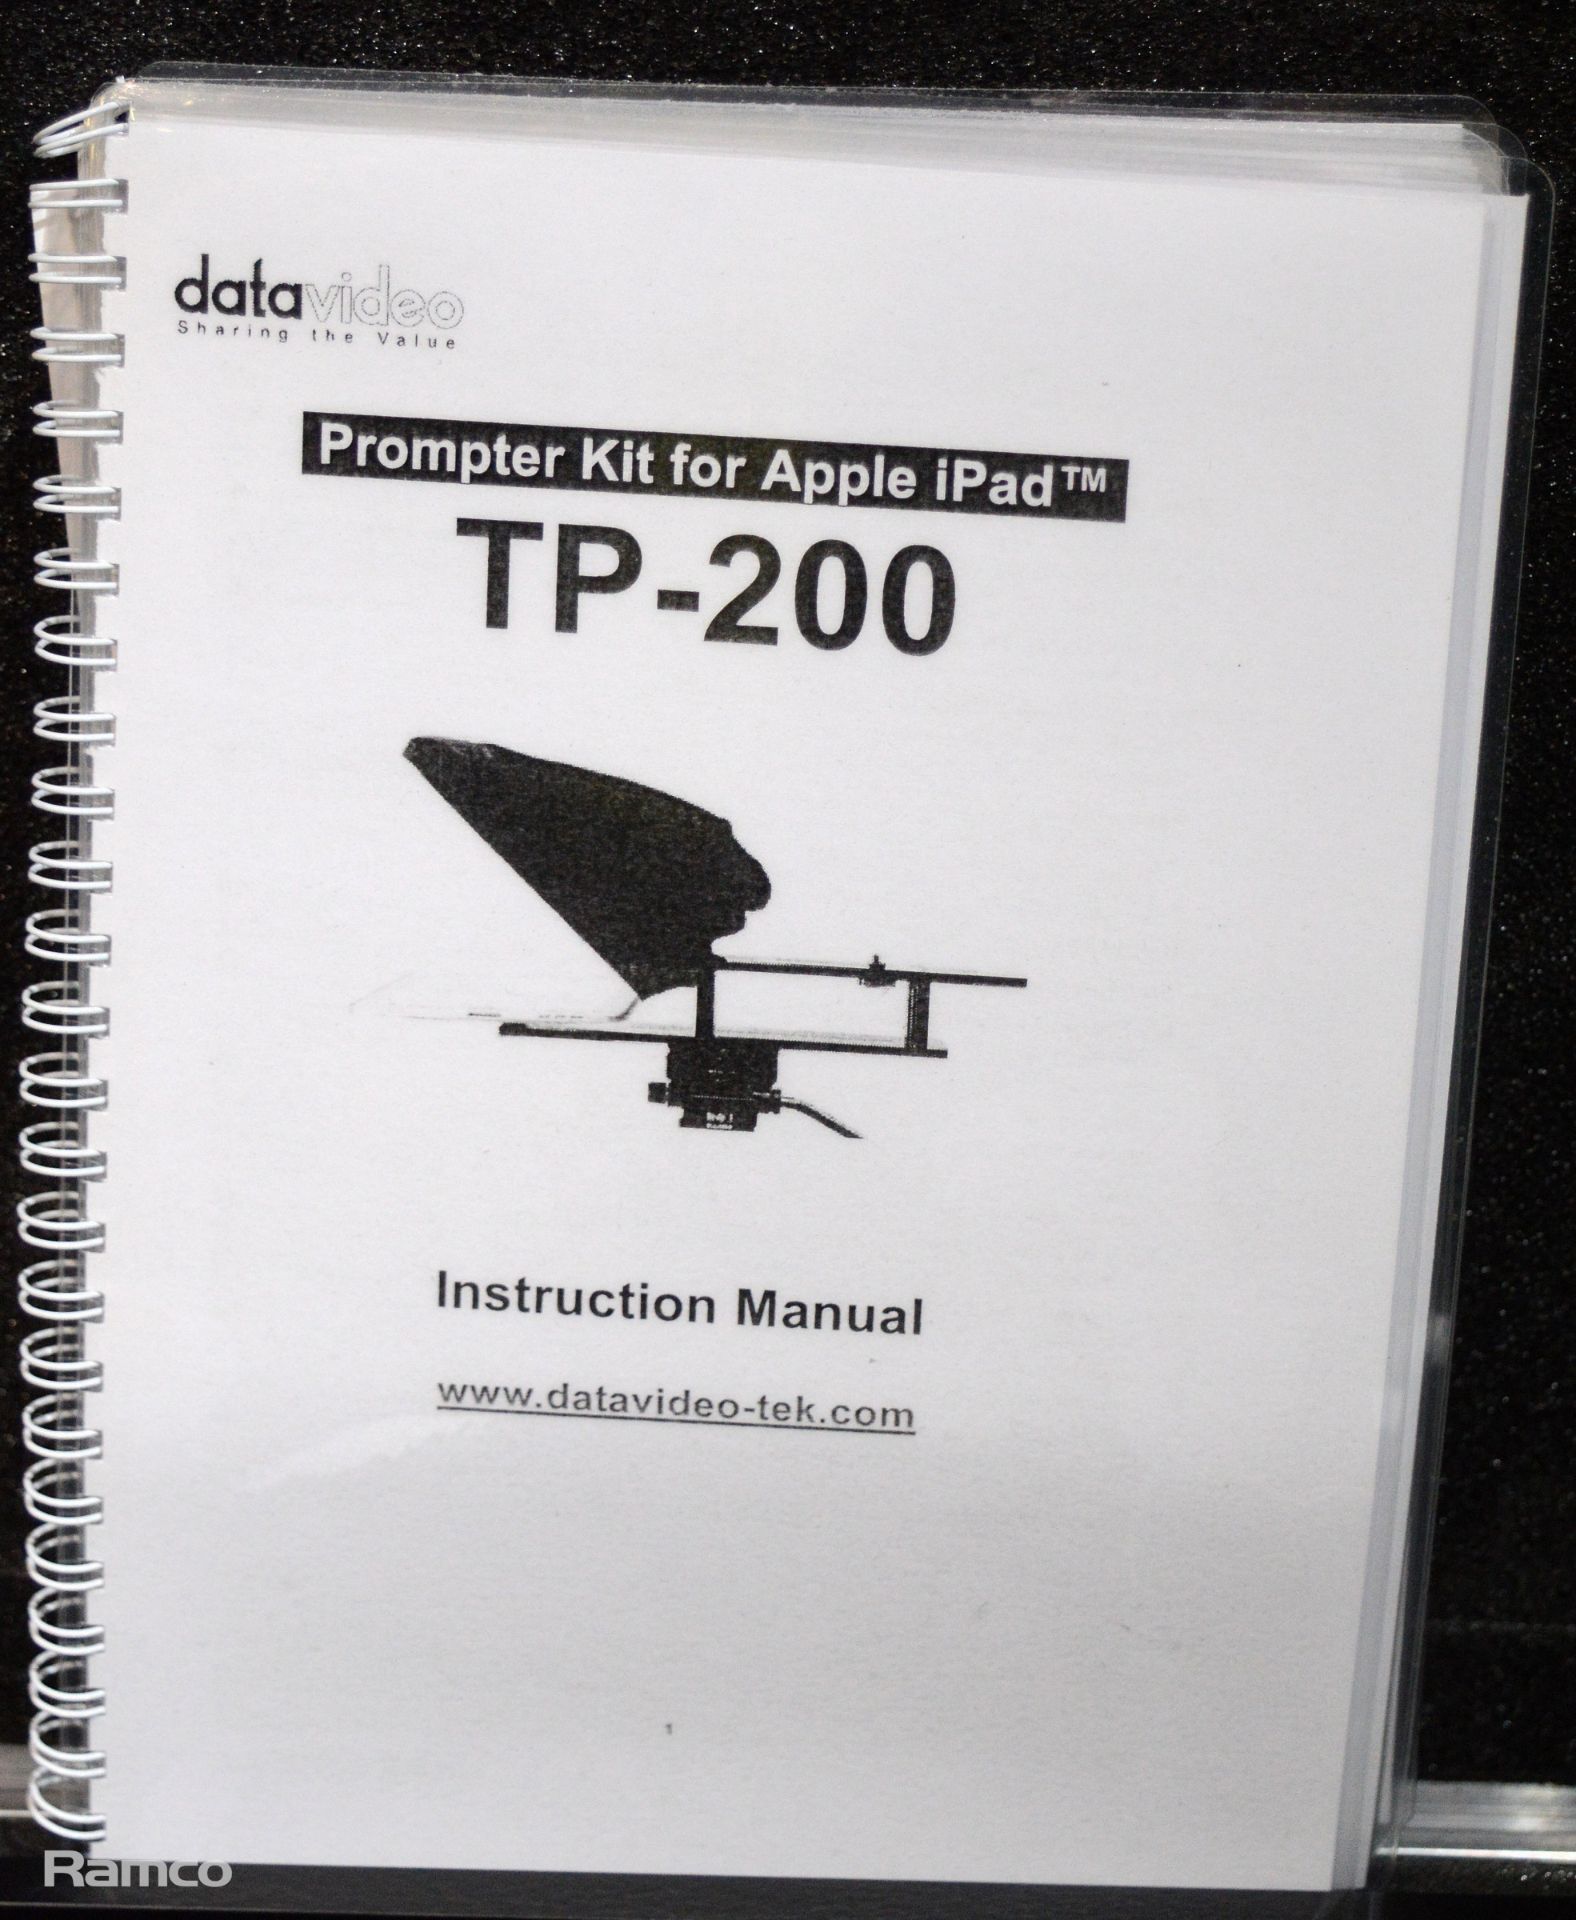 Datavideo Tp-200 Prompter kit for Apple ipad & carry case L47 x W38 x H12cm - Image 3 of 6